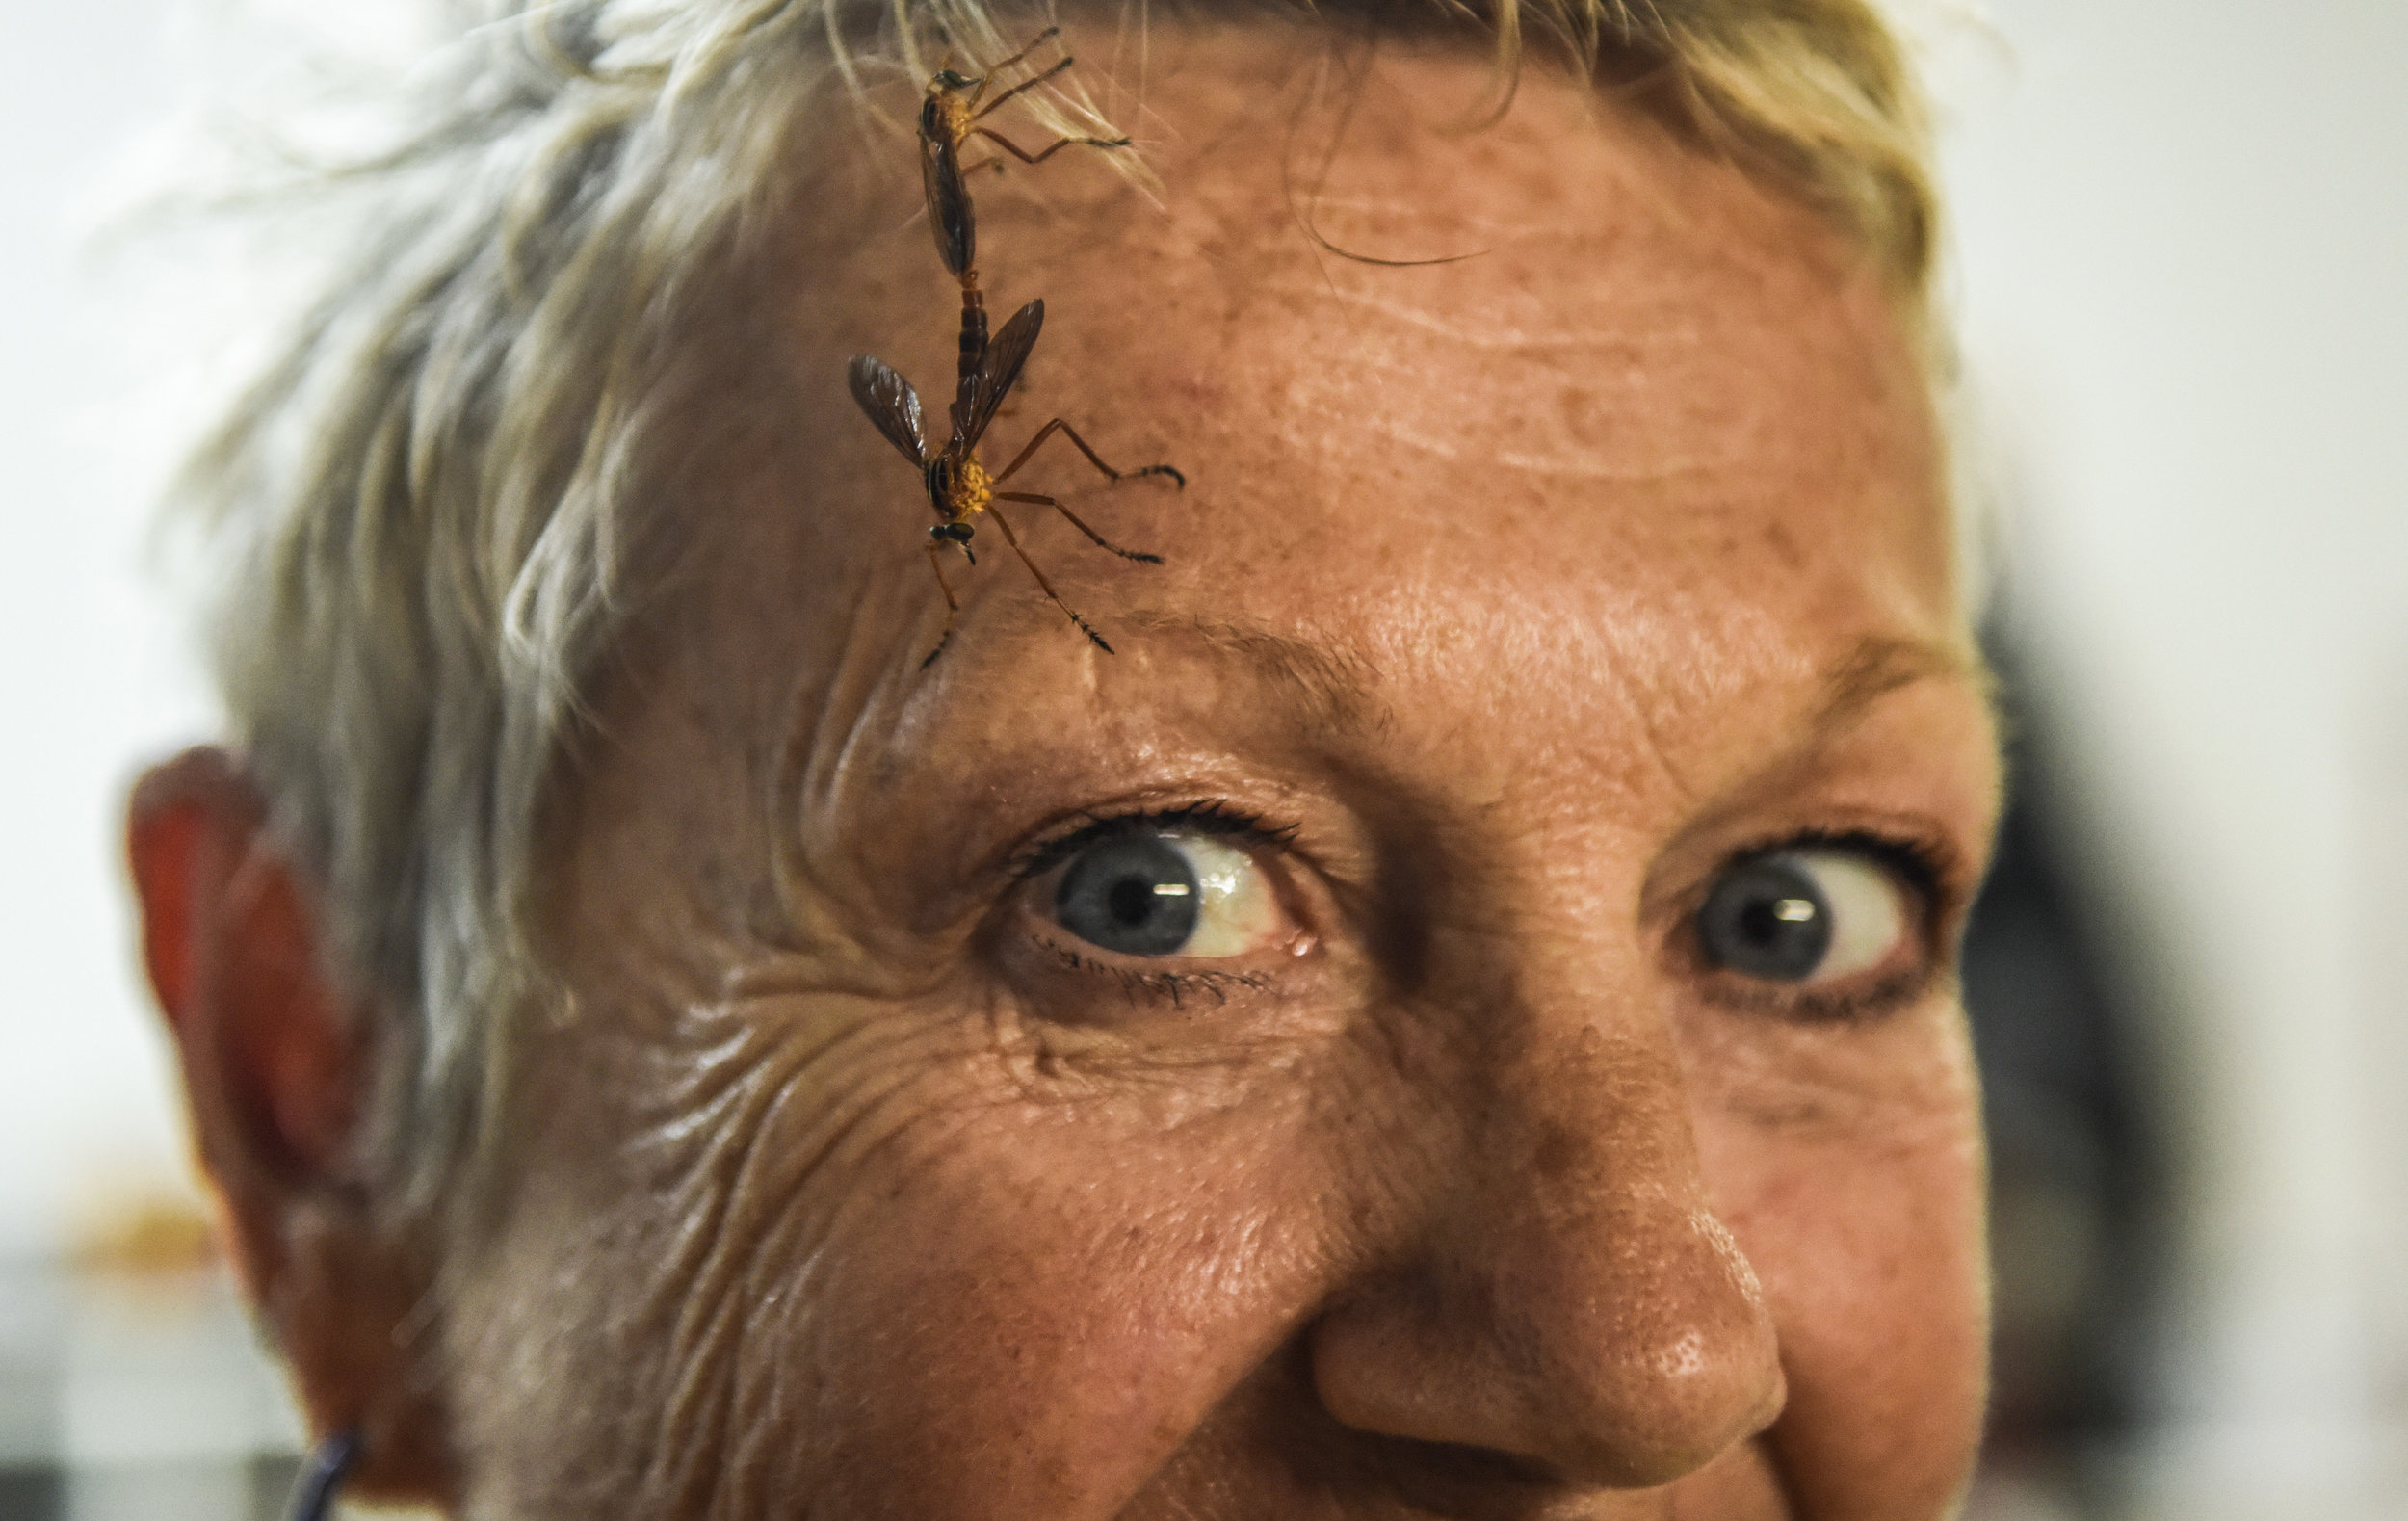  Two mating insects land on the face of a witch celebrating Lammas and the New Moon, Saturday, Aug. 11, 2018. The celebration commemorates the coming harvest, and the new moon represents the start of something new. 